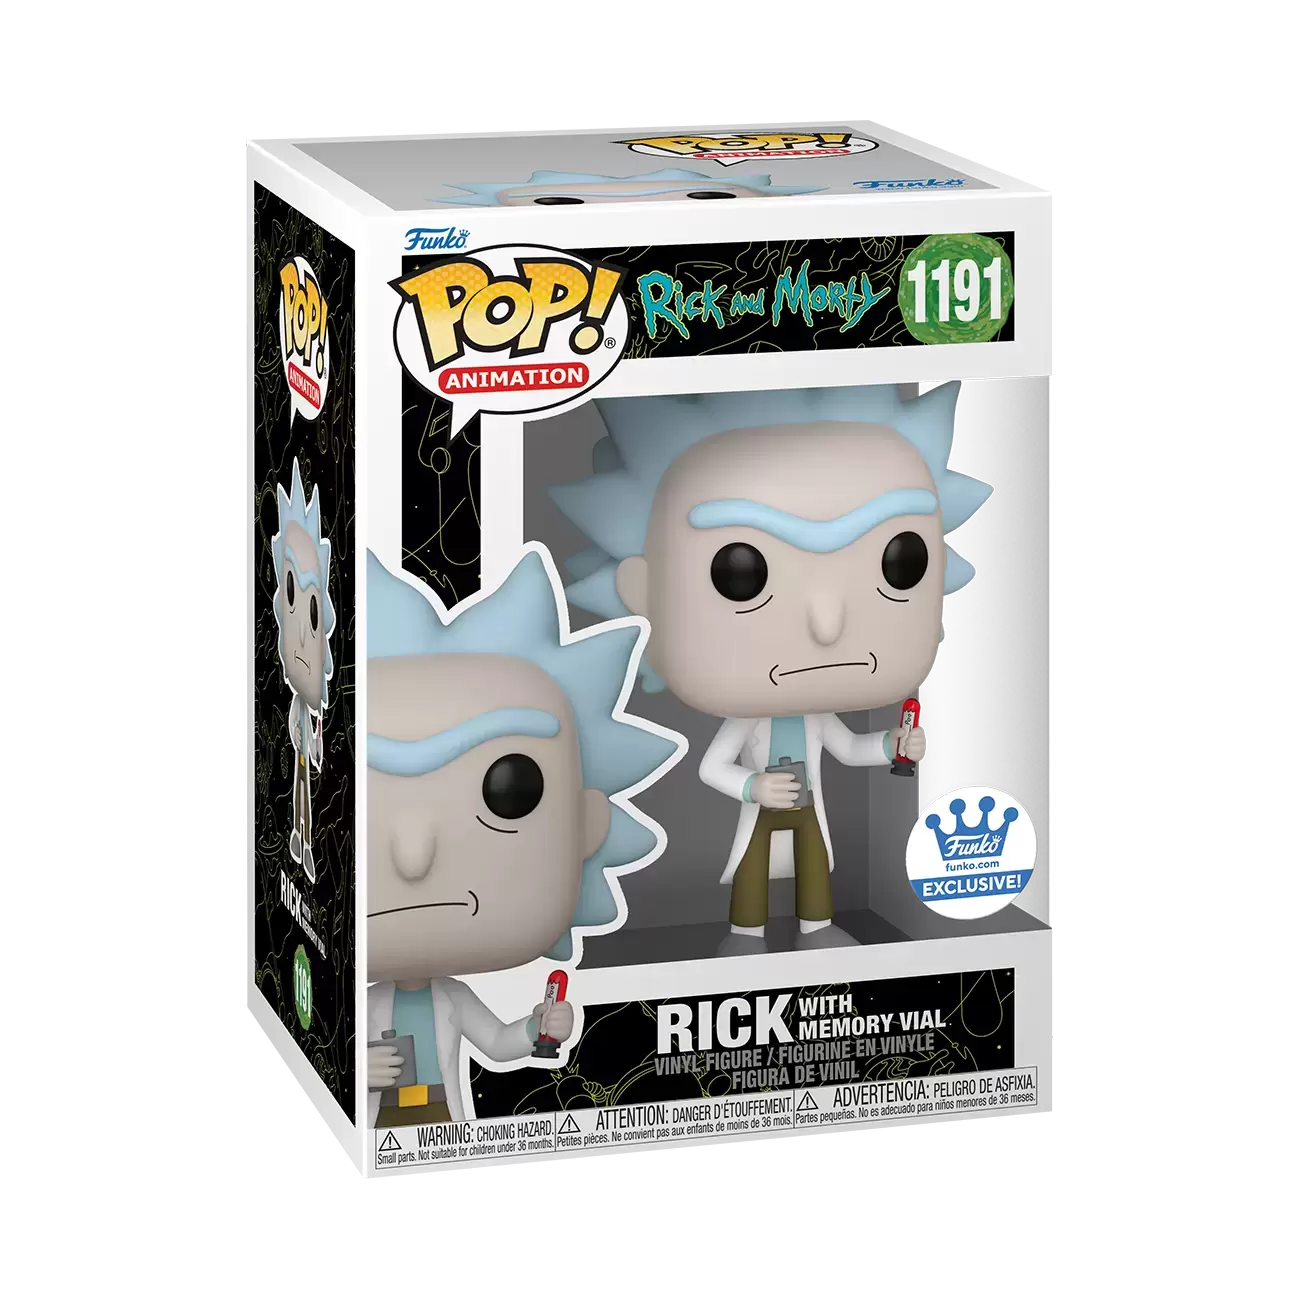 POP! Animation - Rick and Morty - Rick with Memory Vial